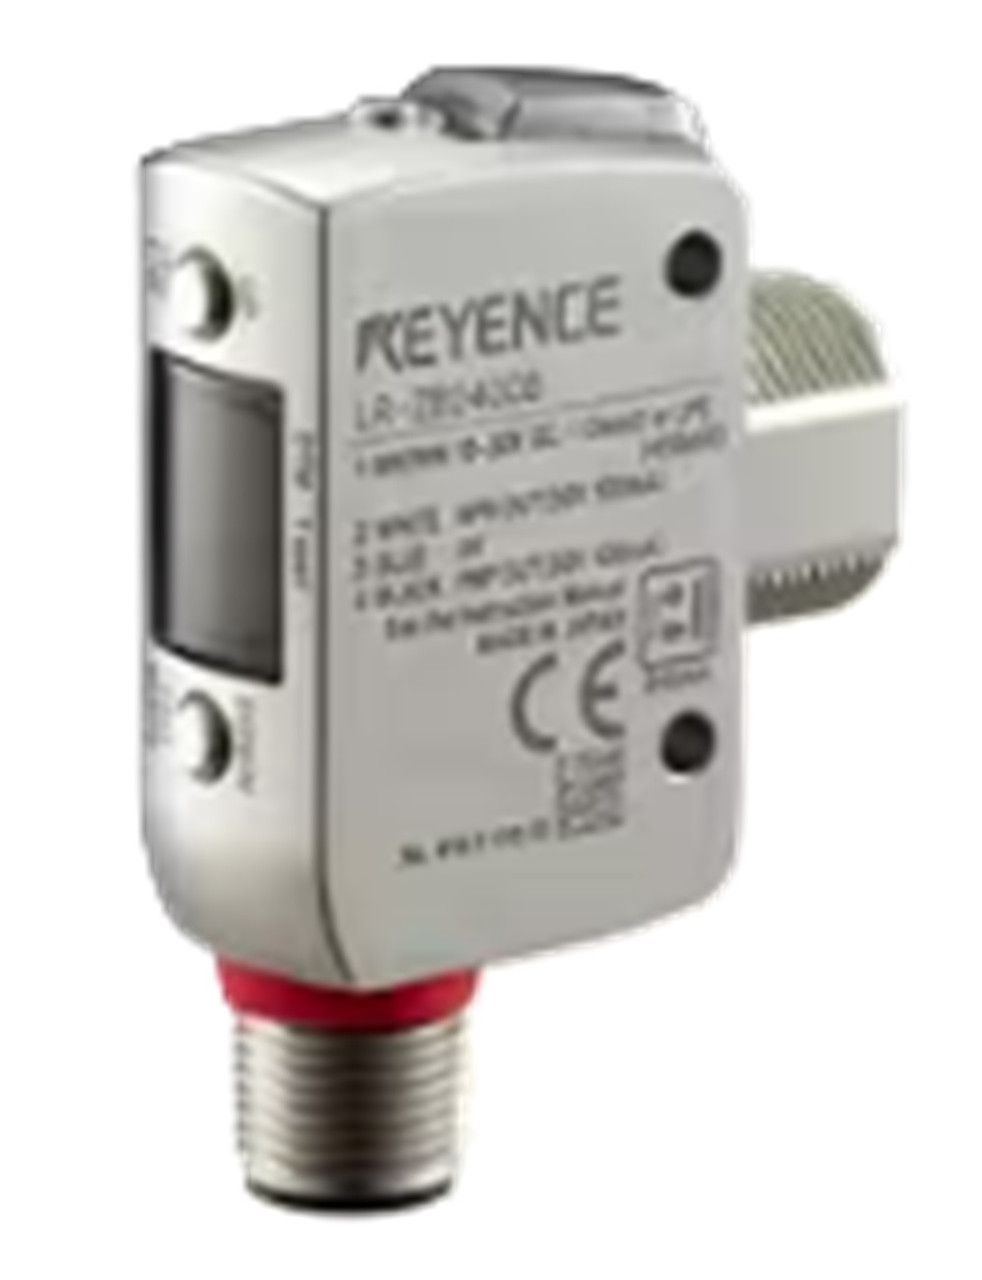 Keyence LR-ZB240CB Self-Contained Photoelectric CMOS Laser Sensor, 240 mm [New]